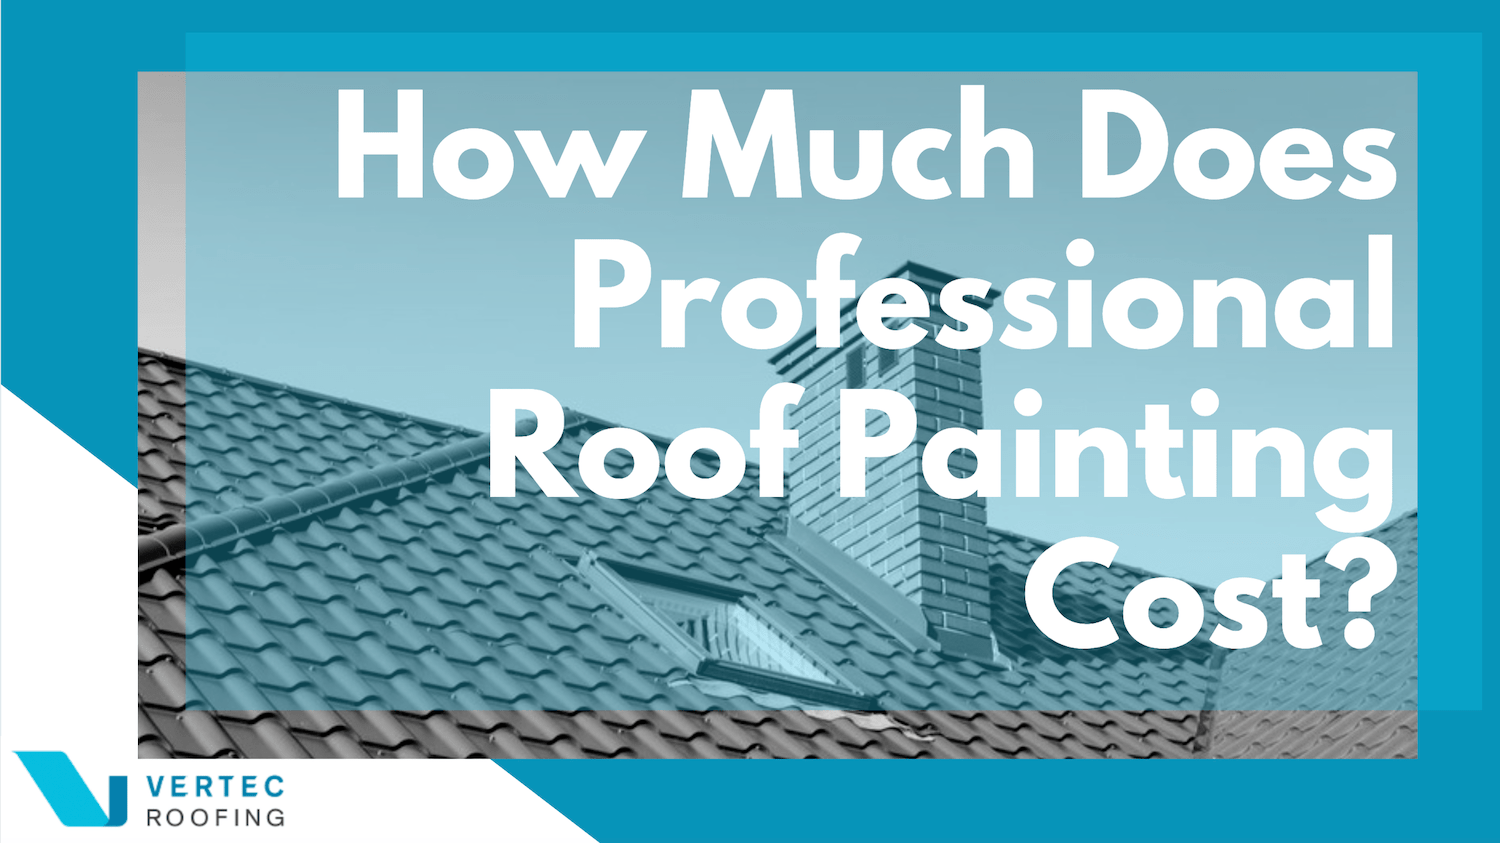 How Much Does Professional Roof Painting Cost?